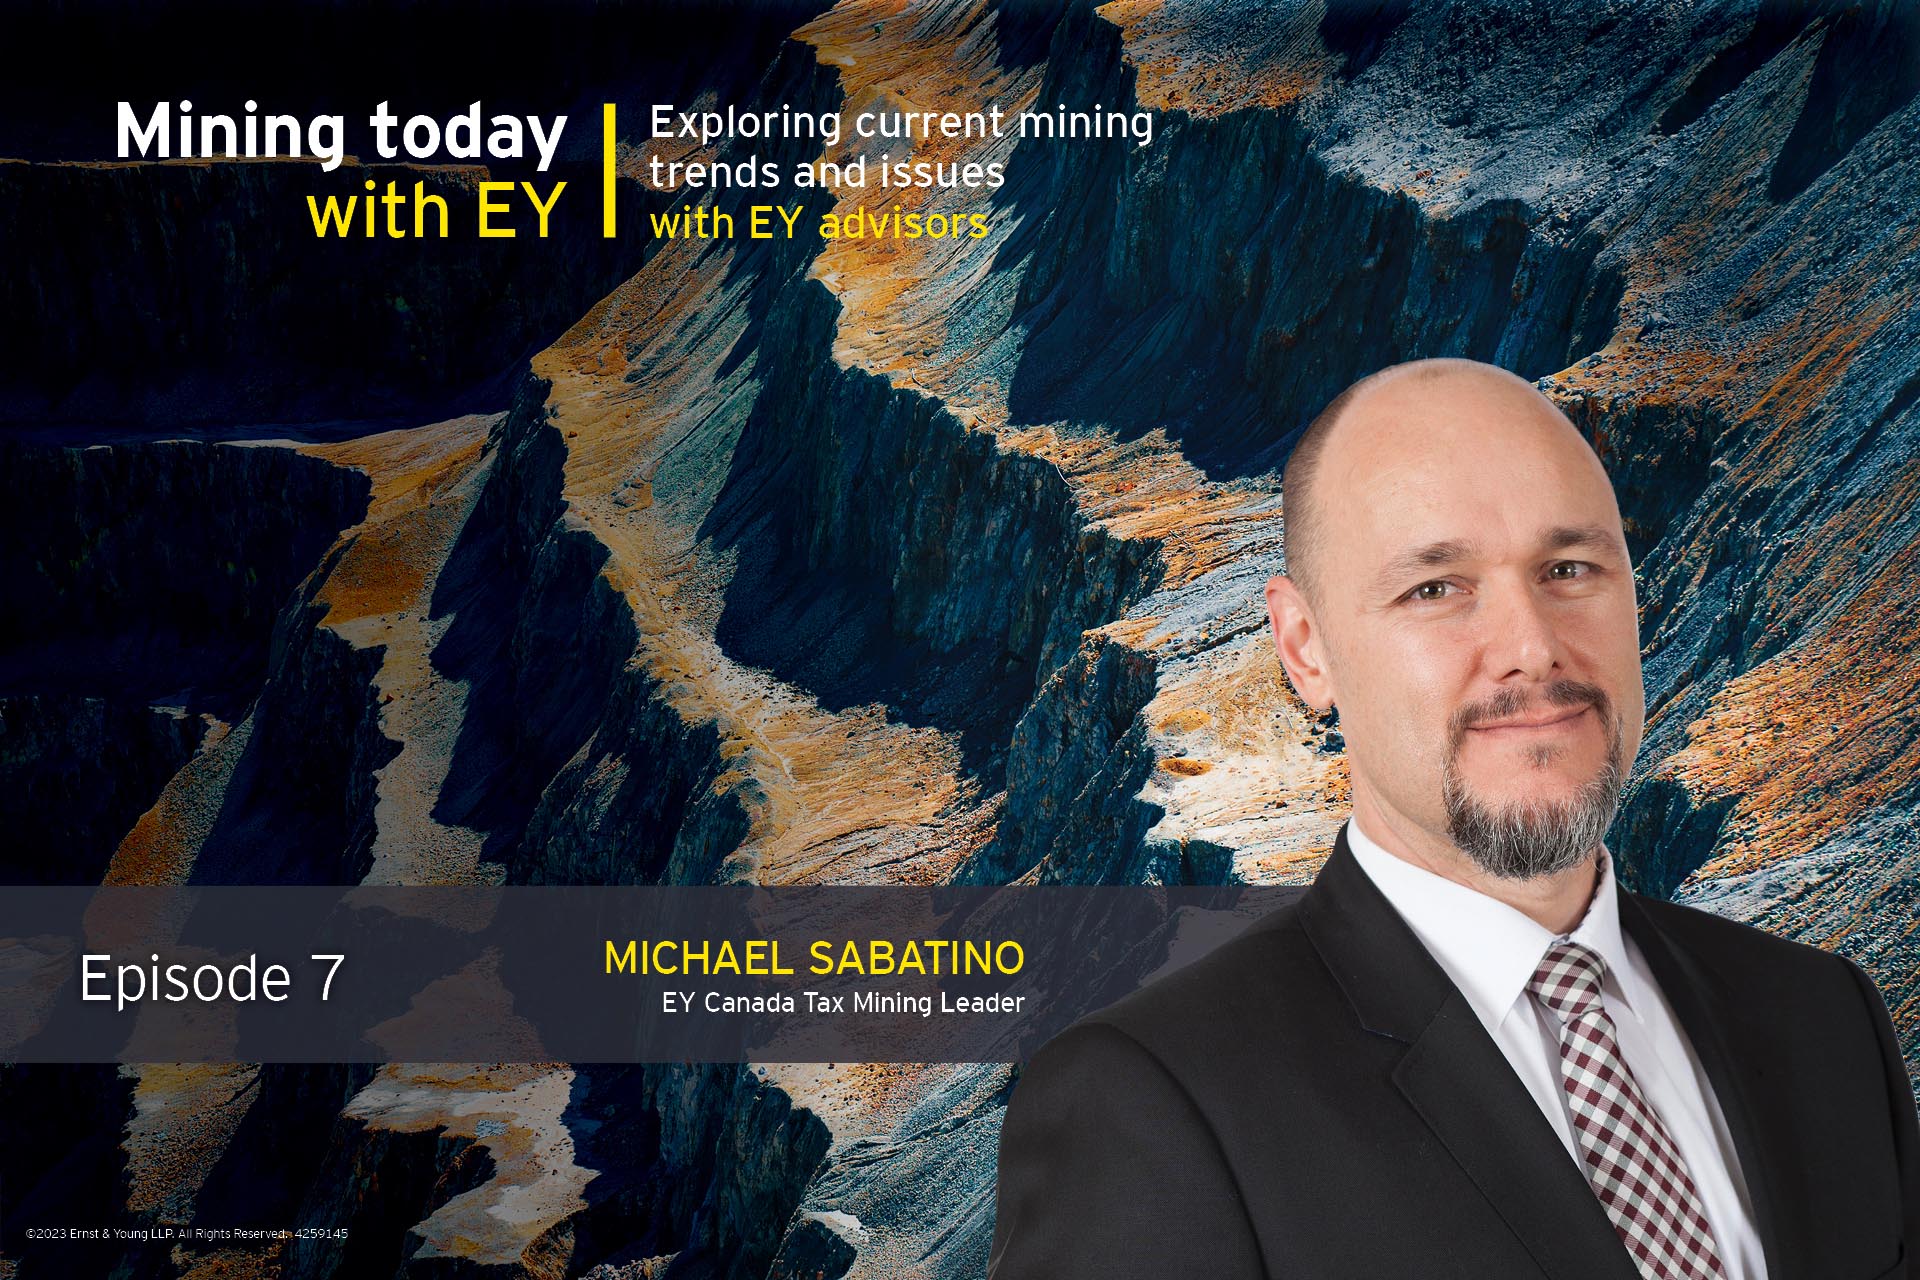 Mining today with EY – EP 7: Recent refundable tax credits and global minimum tax rules in mining and metals